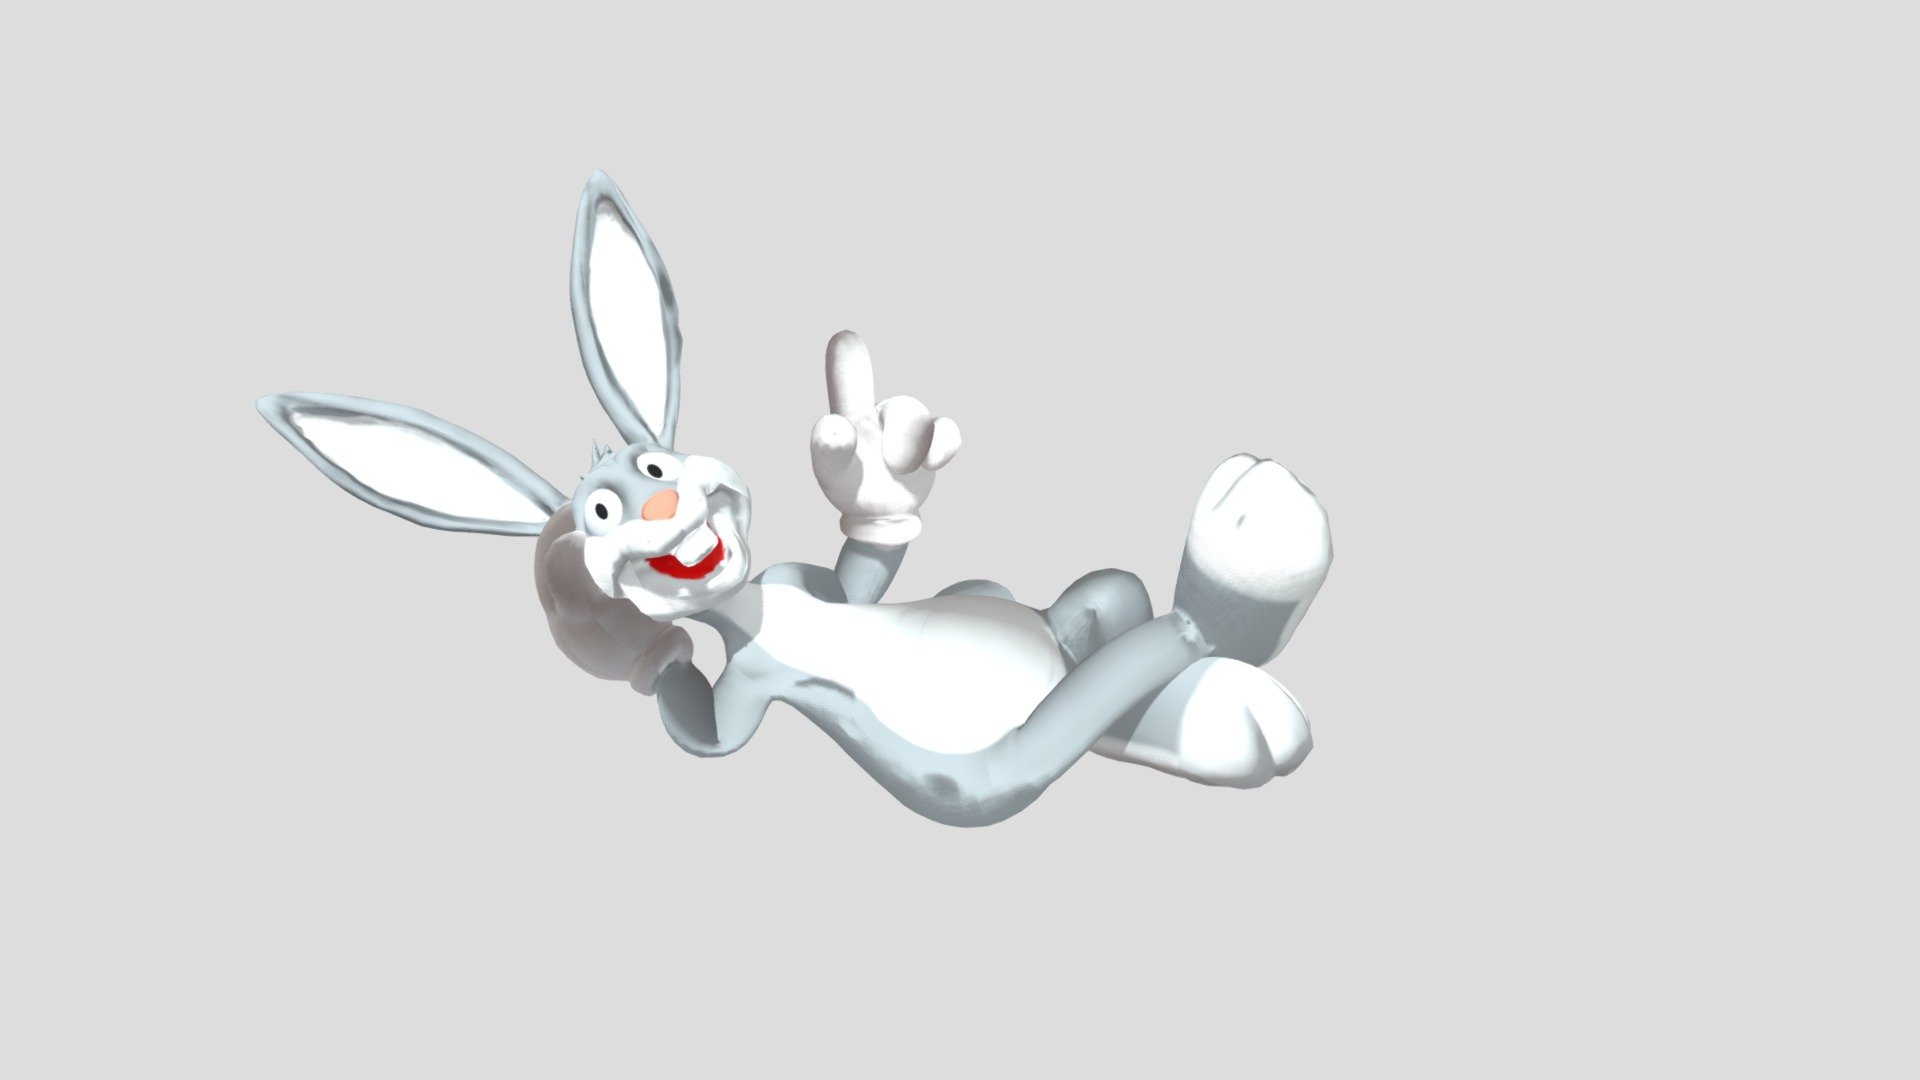 bugs-bunny-lay-download-free-3d-model-by-david-mcdaid-bmc-084921a